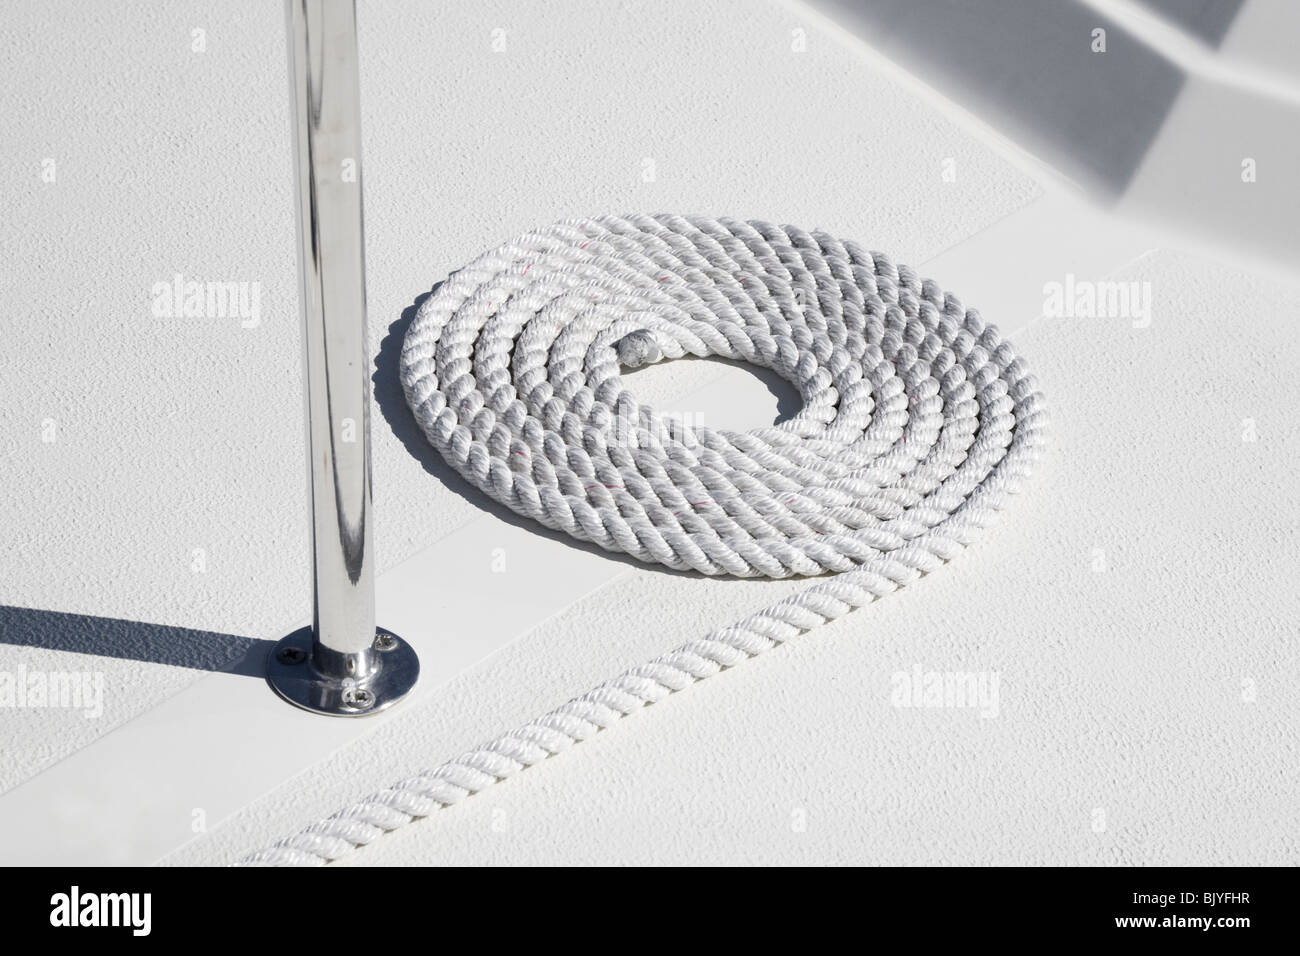 Rope in a tidy circle on the deck of a boat. Stock Photo